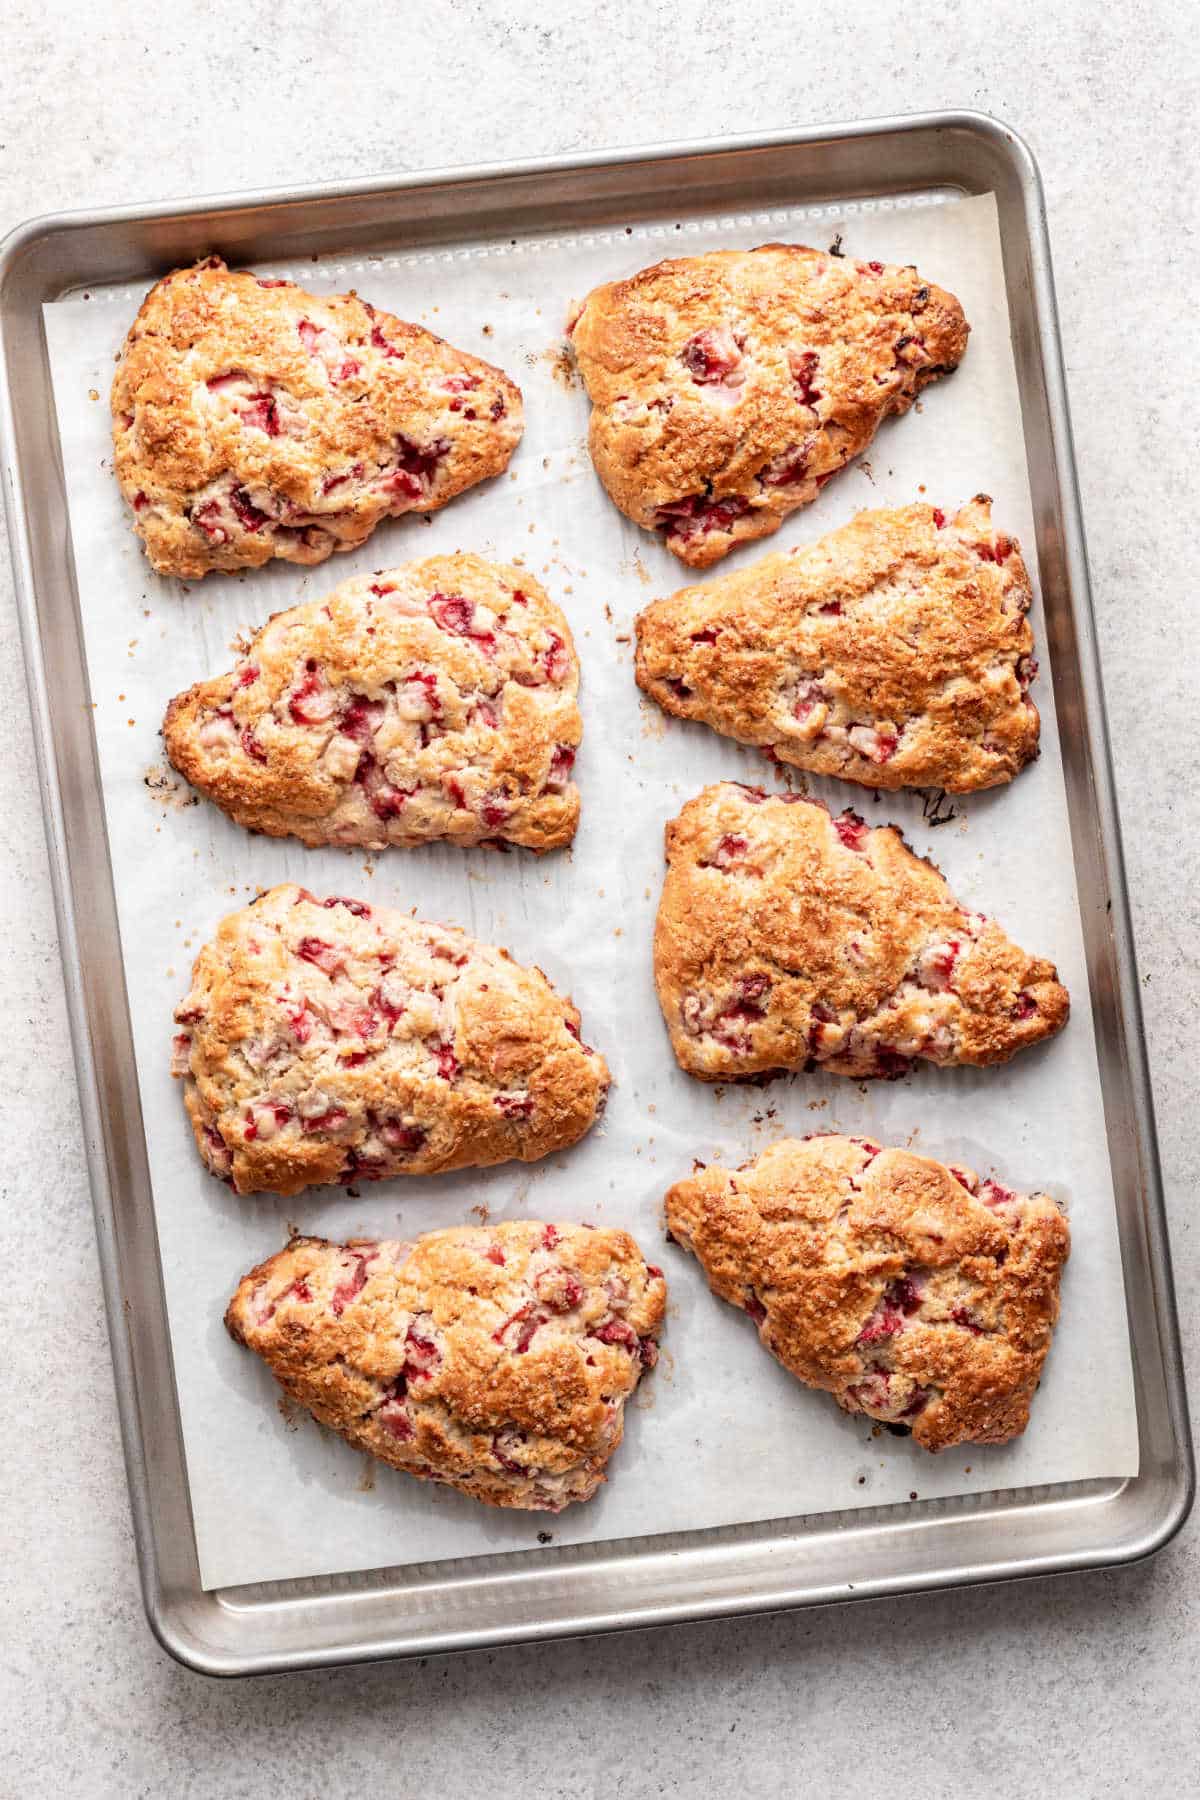 Baked strawberry scones on a baking tray.